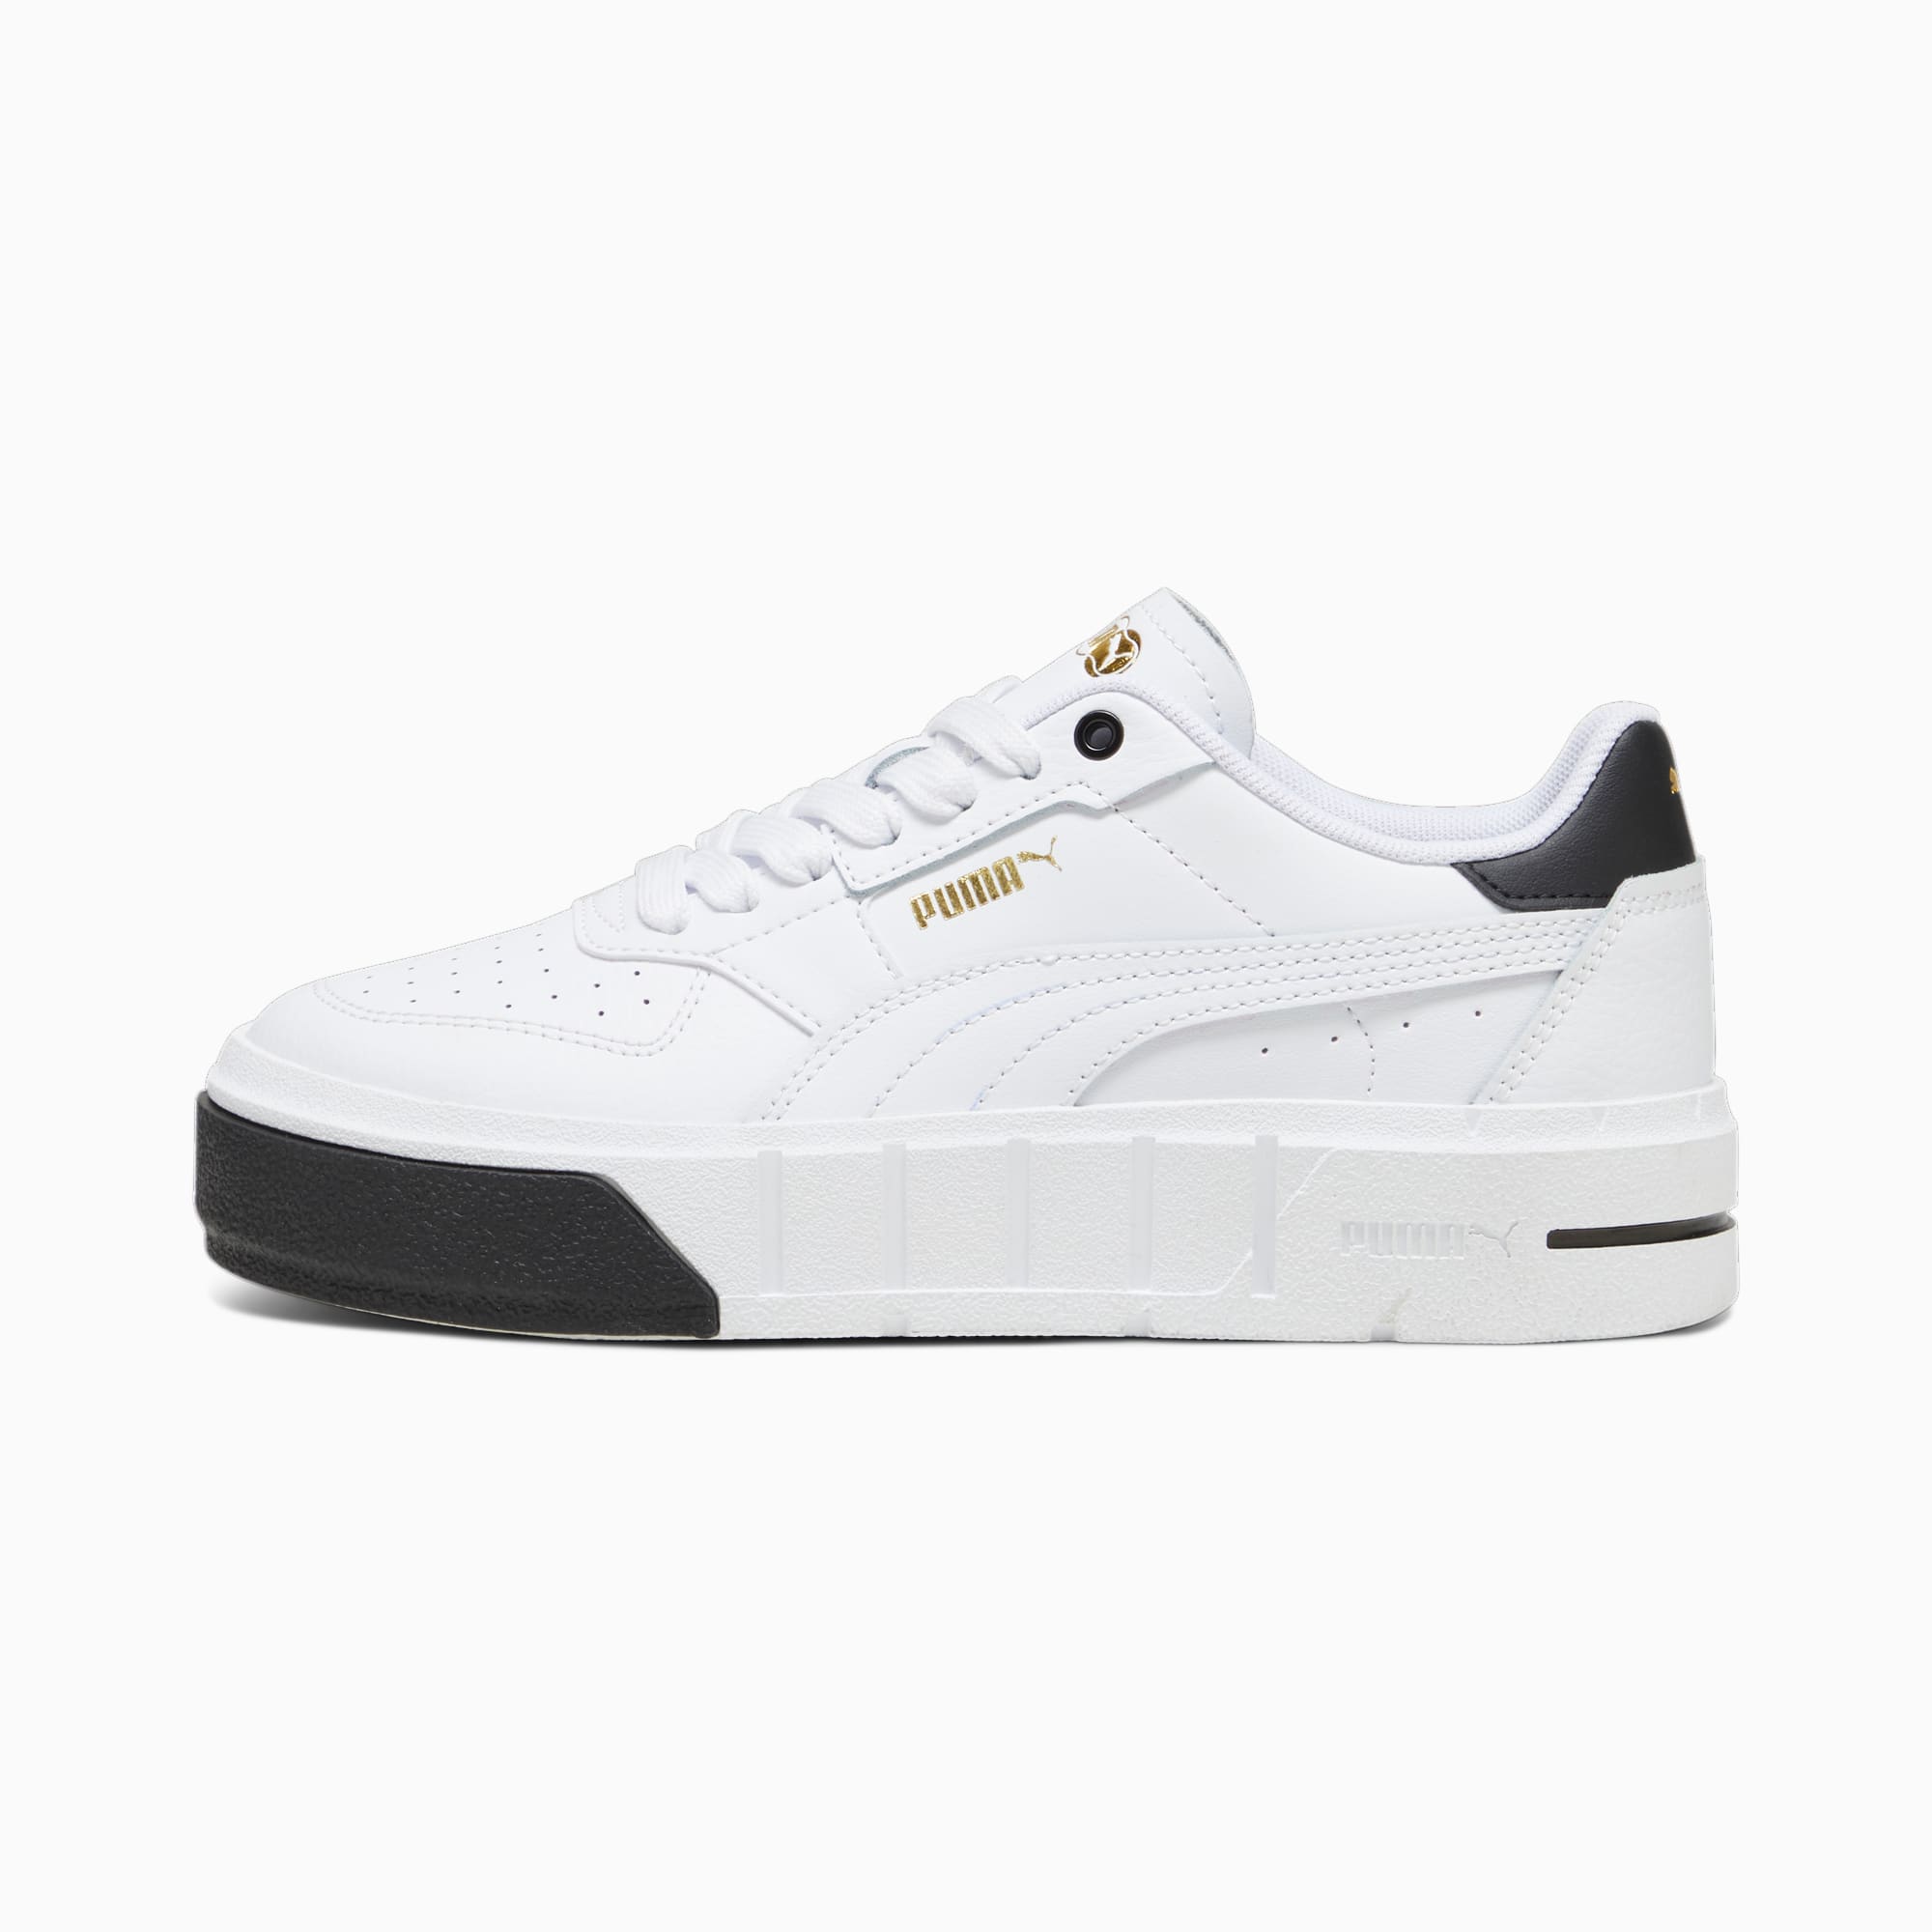 PUMA Cali Court Youth Leather Sneakers, White/Black